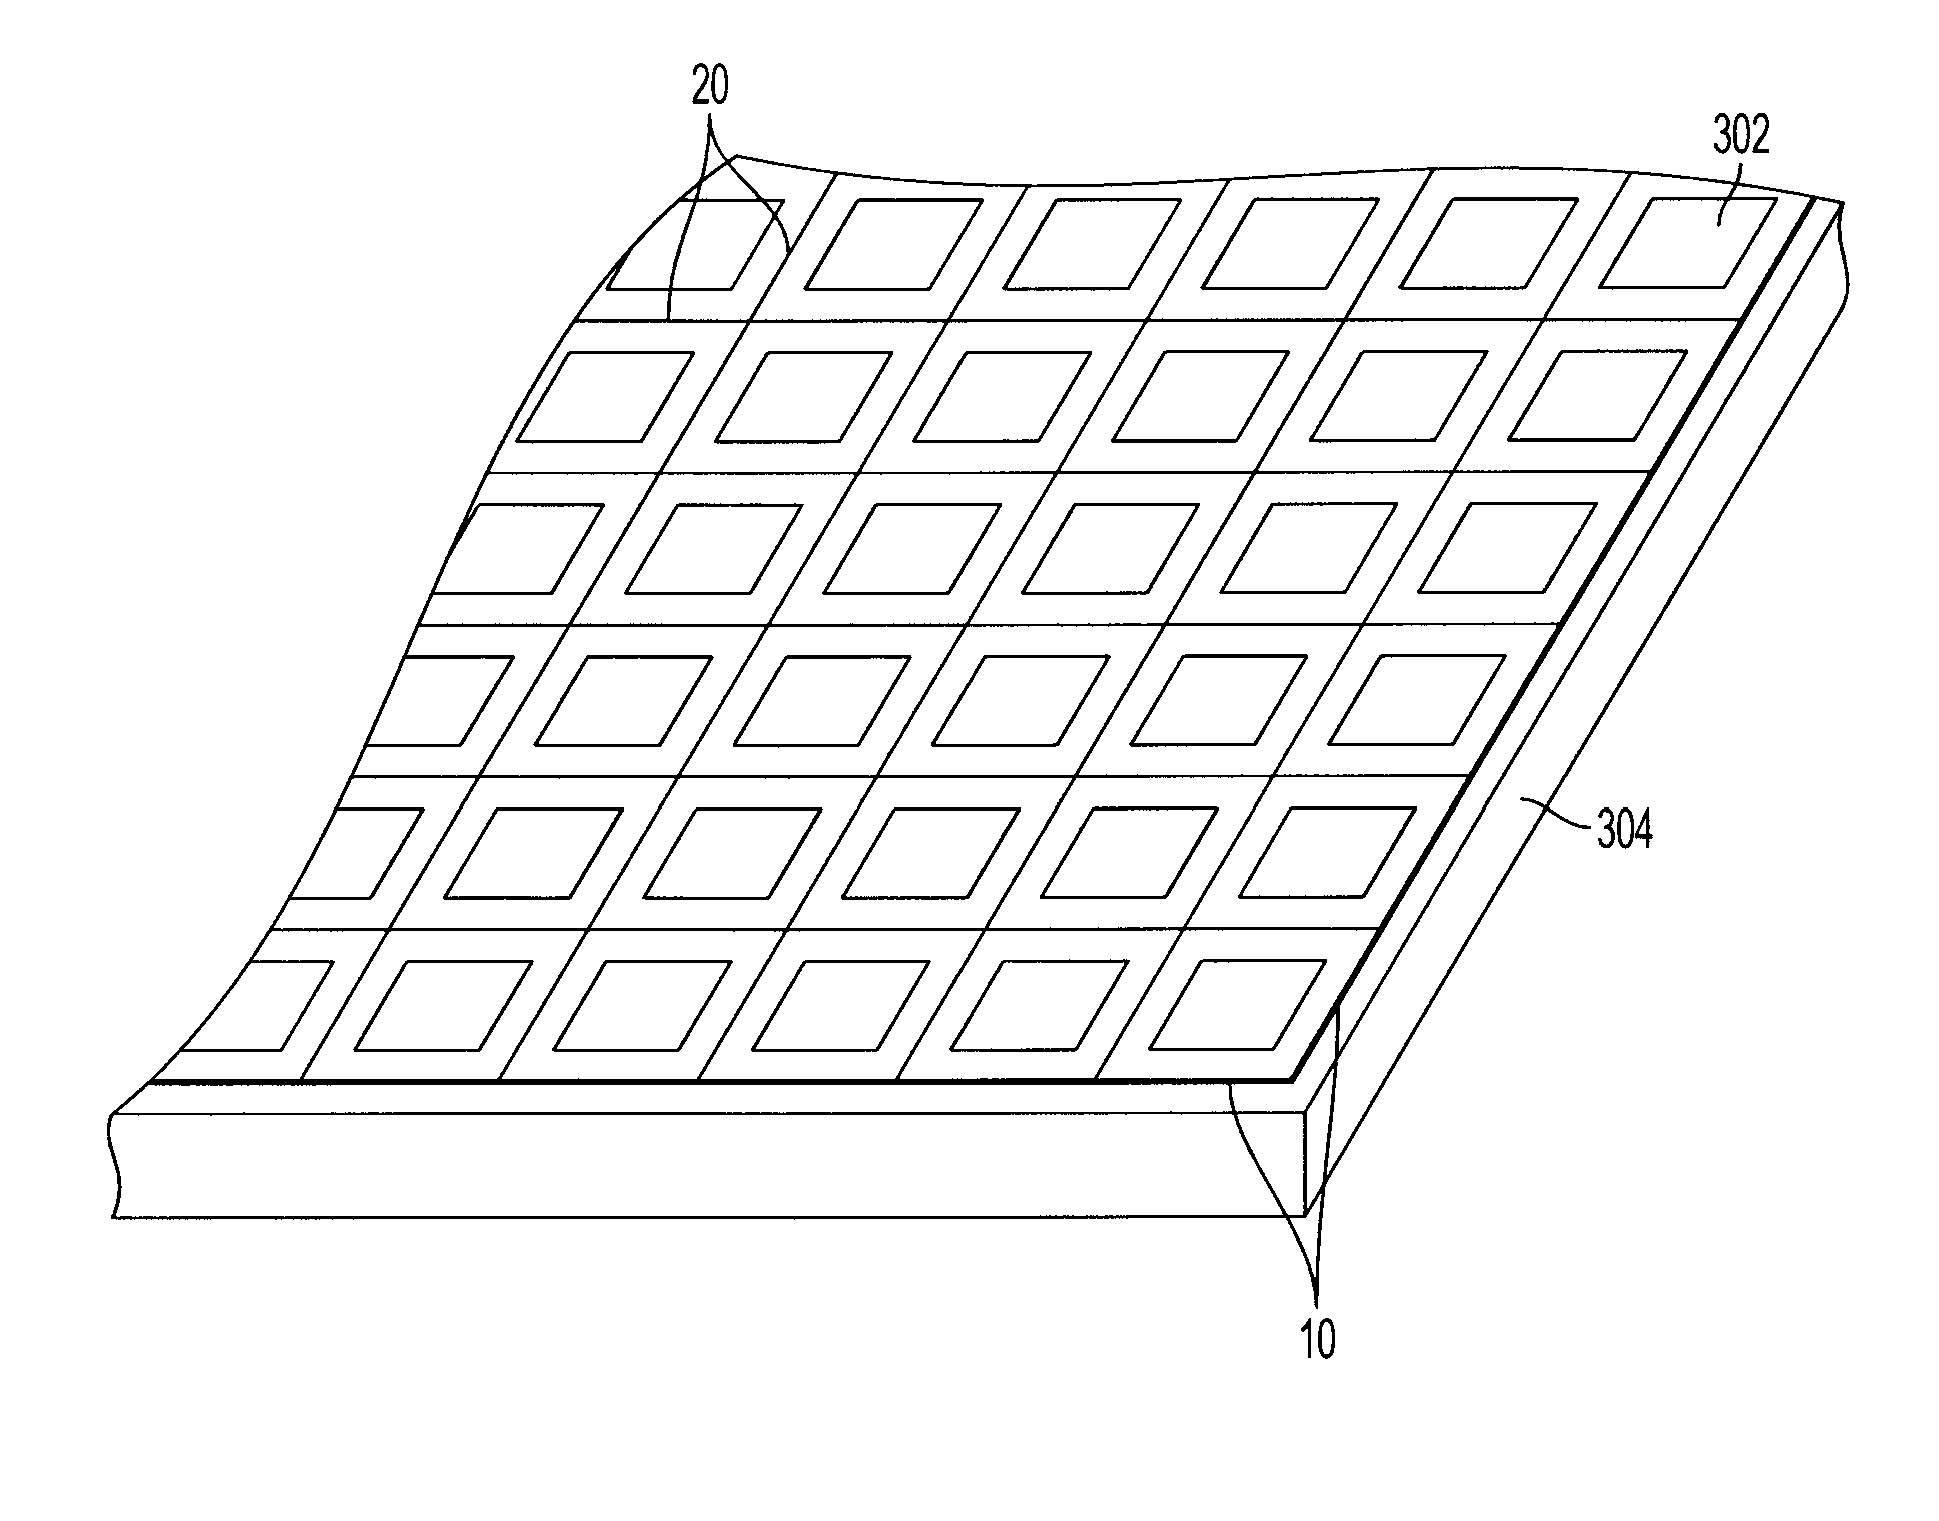 Method of fabricating patterned CZT and CdTe devices